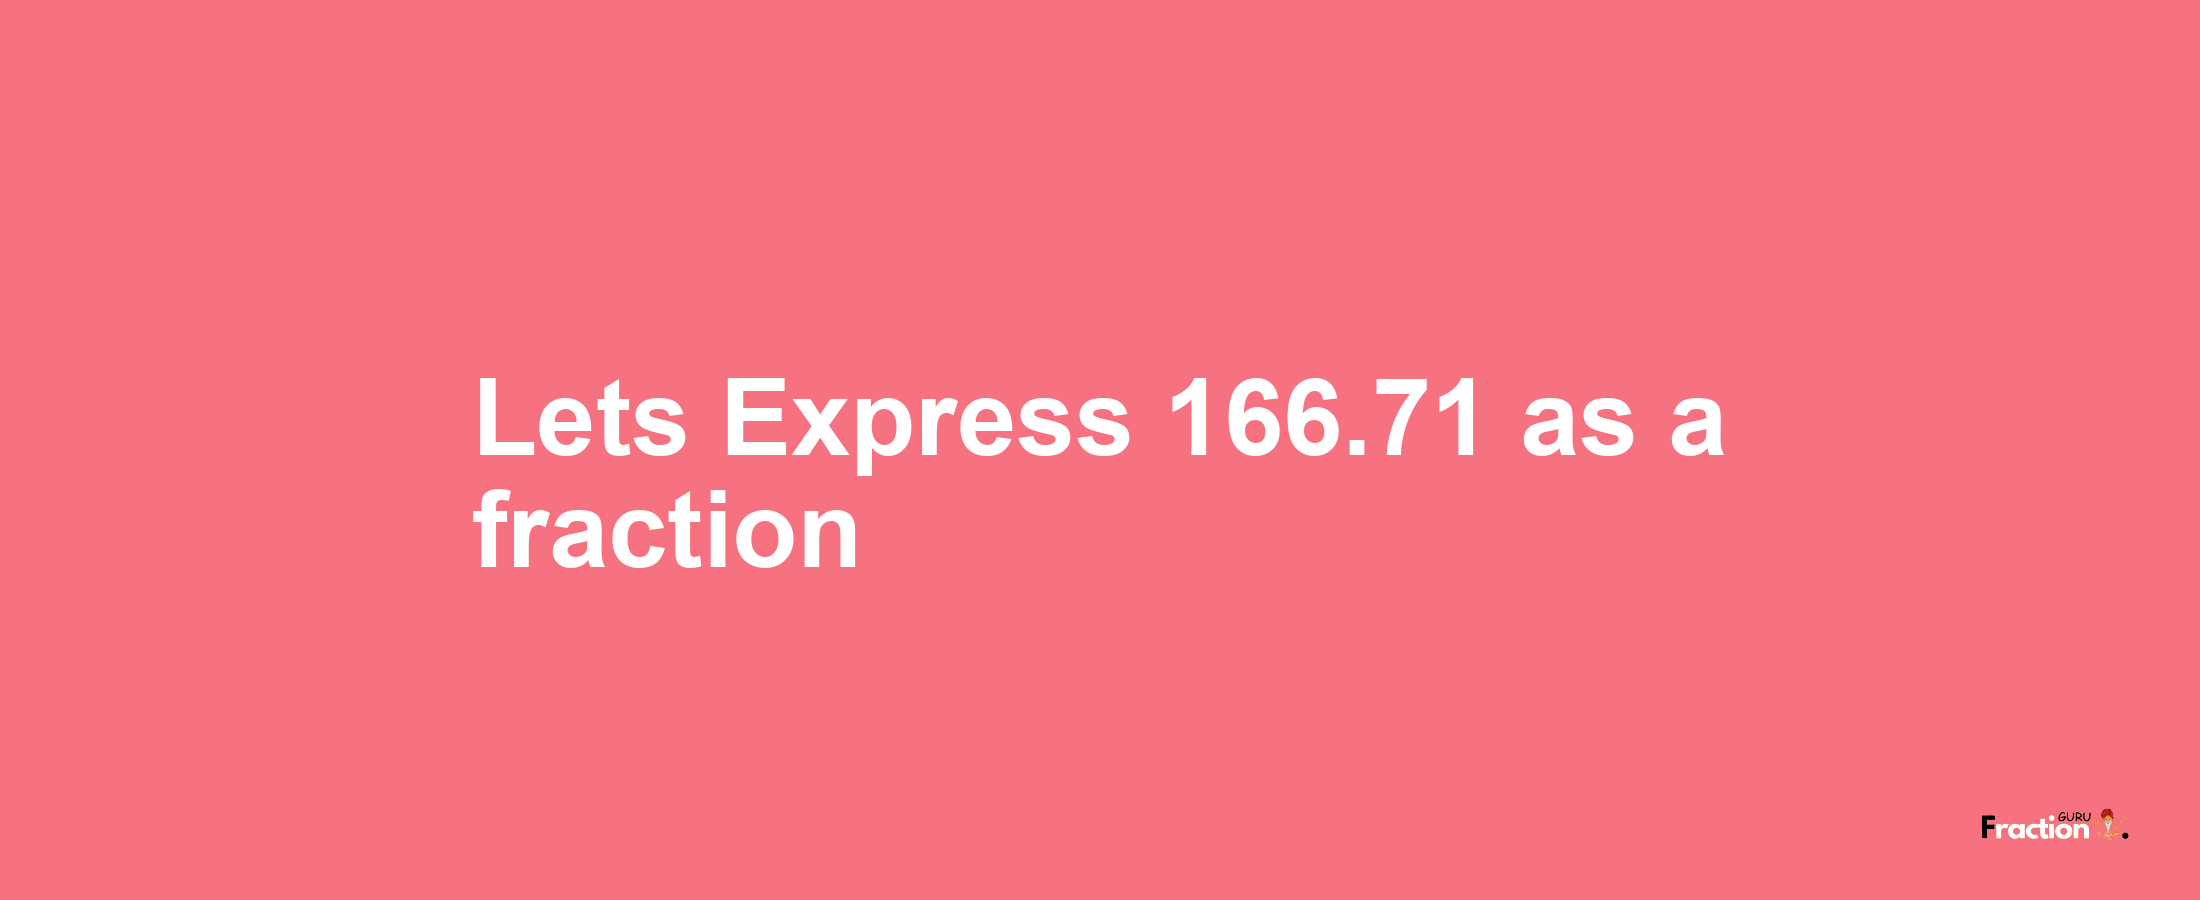 Lets Express 166.71 as afraction